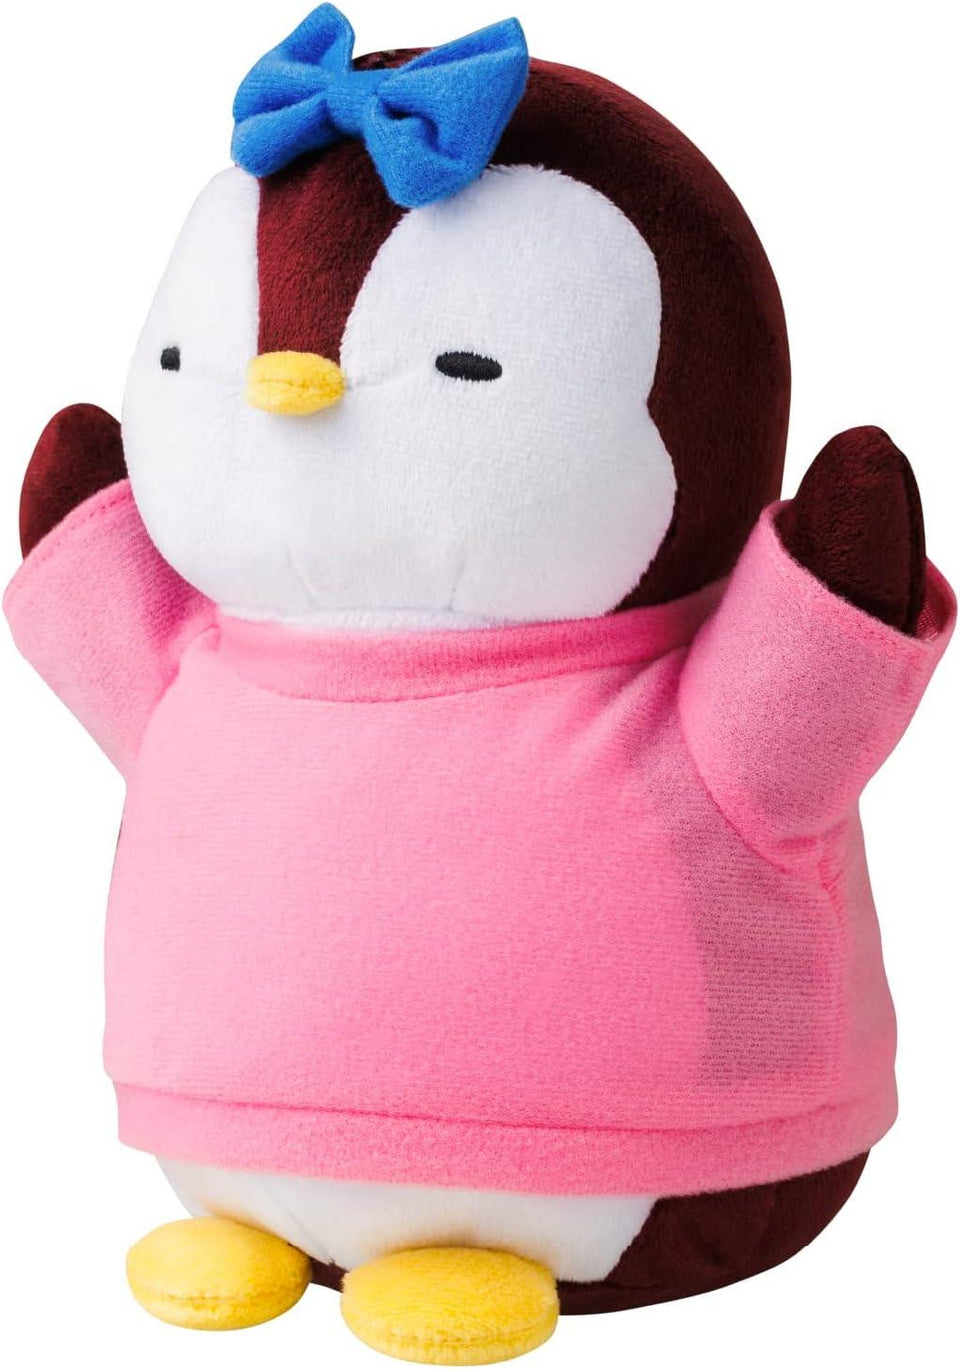 Lil Bow Pudgy Penguins Plush Buddy Pink Shirt Cute Soft Cuddly Toy